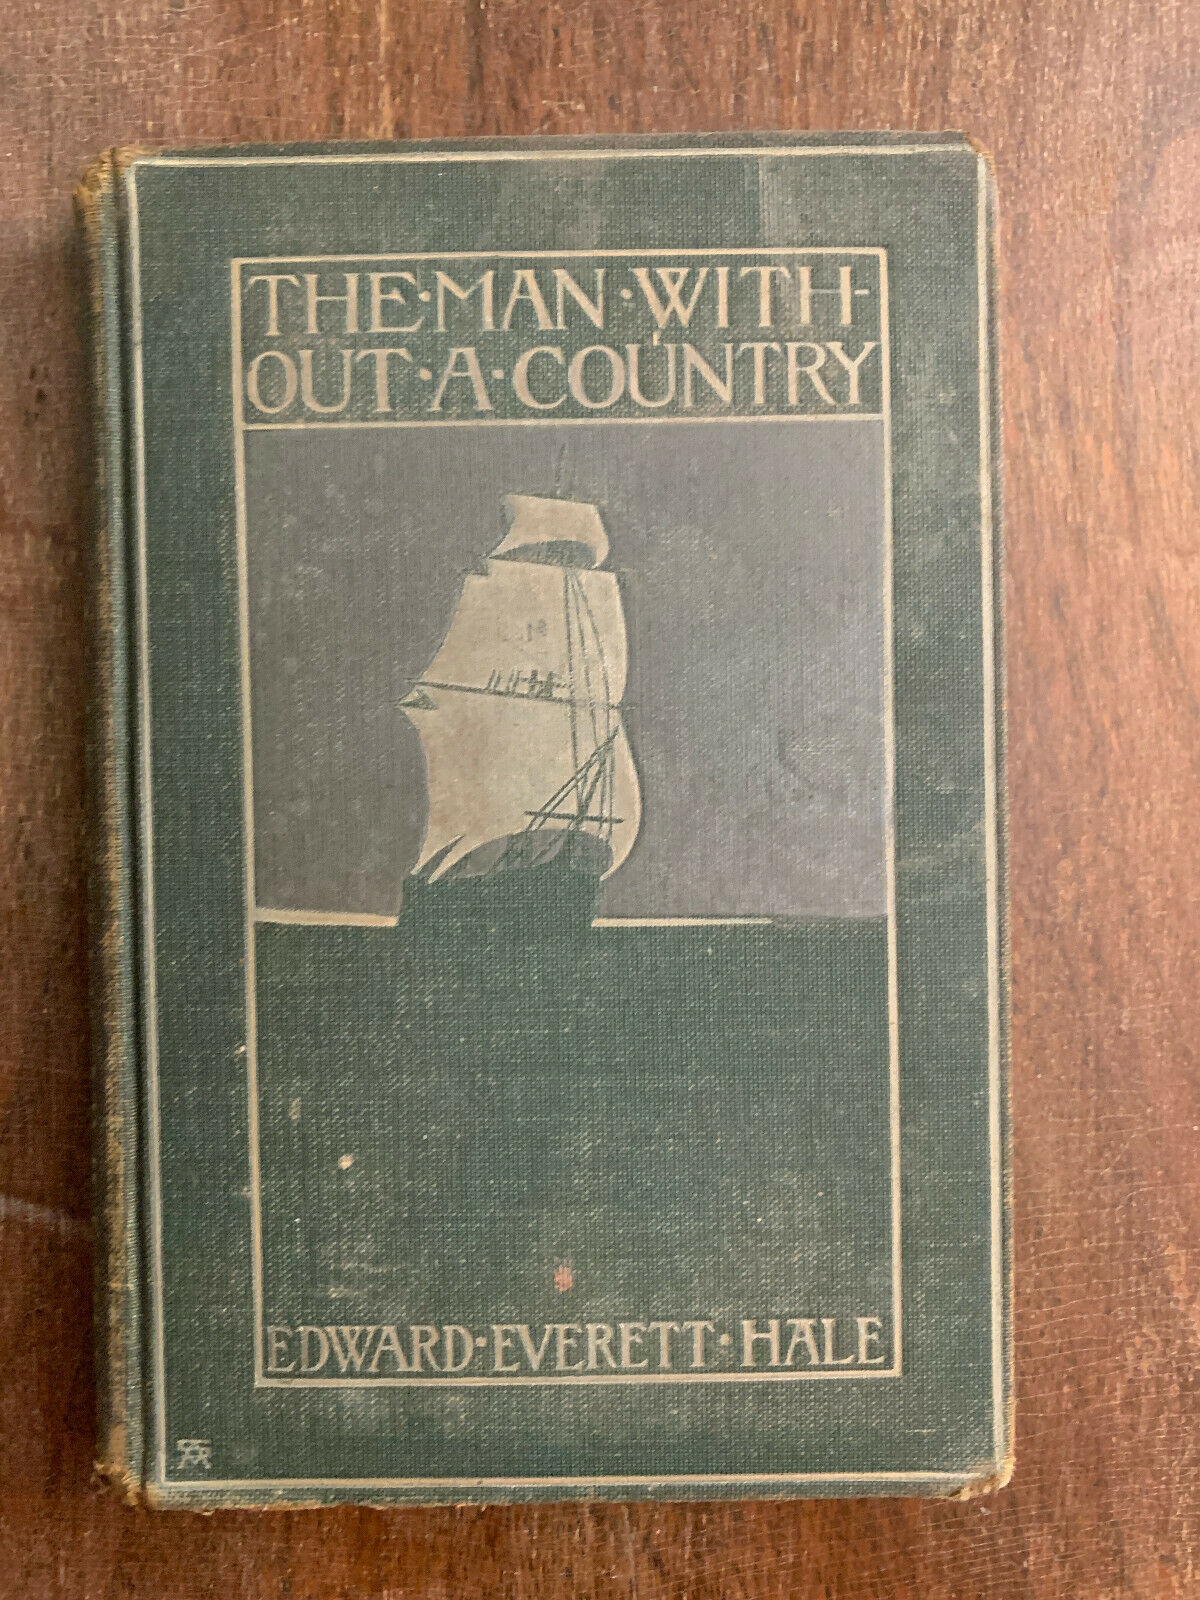 The Man Without A Country by Edward Everett Hale Hardcover 1913 (C5)